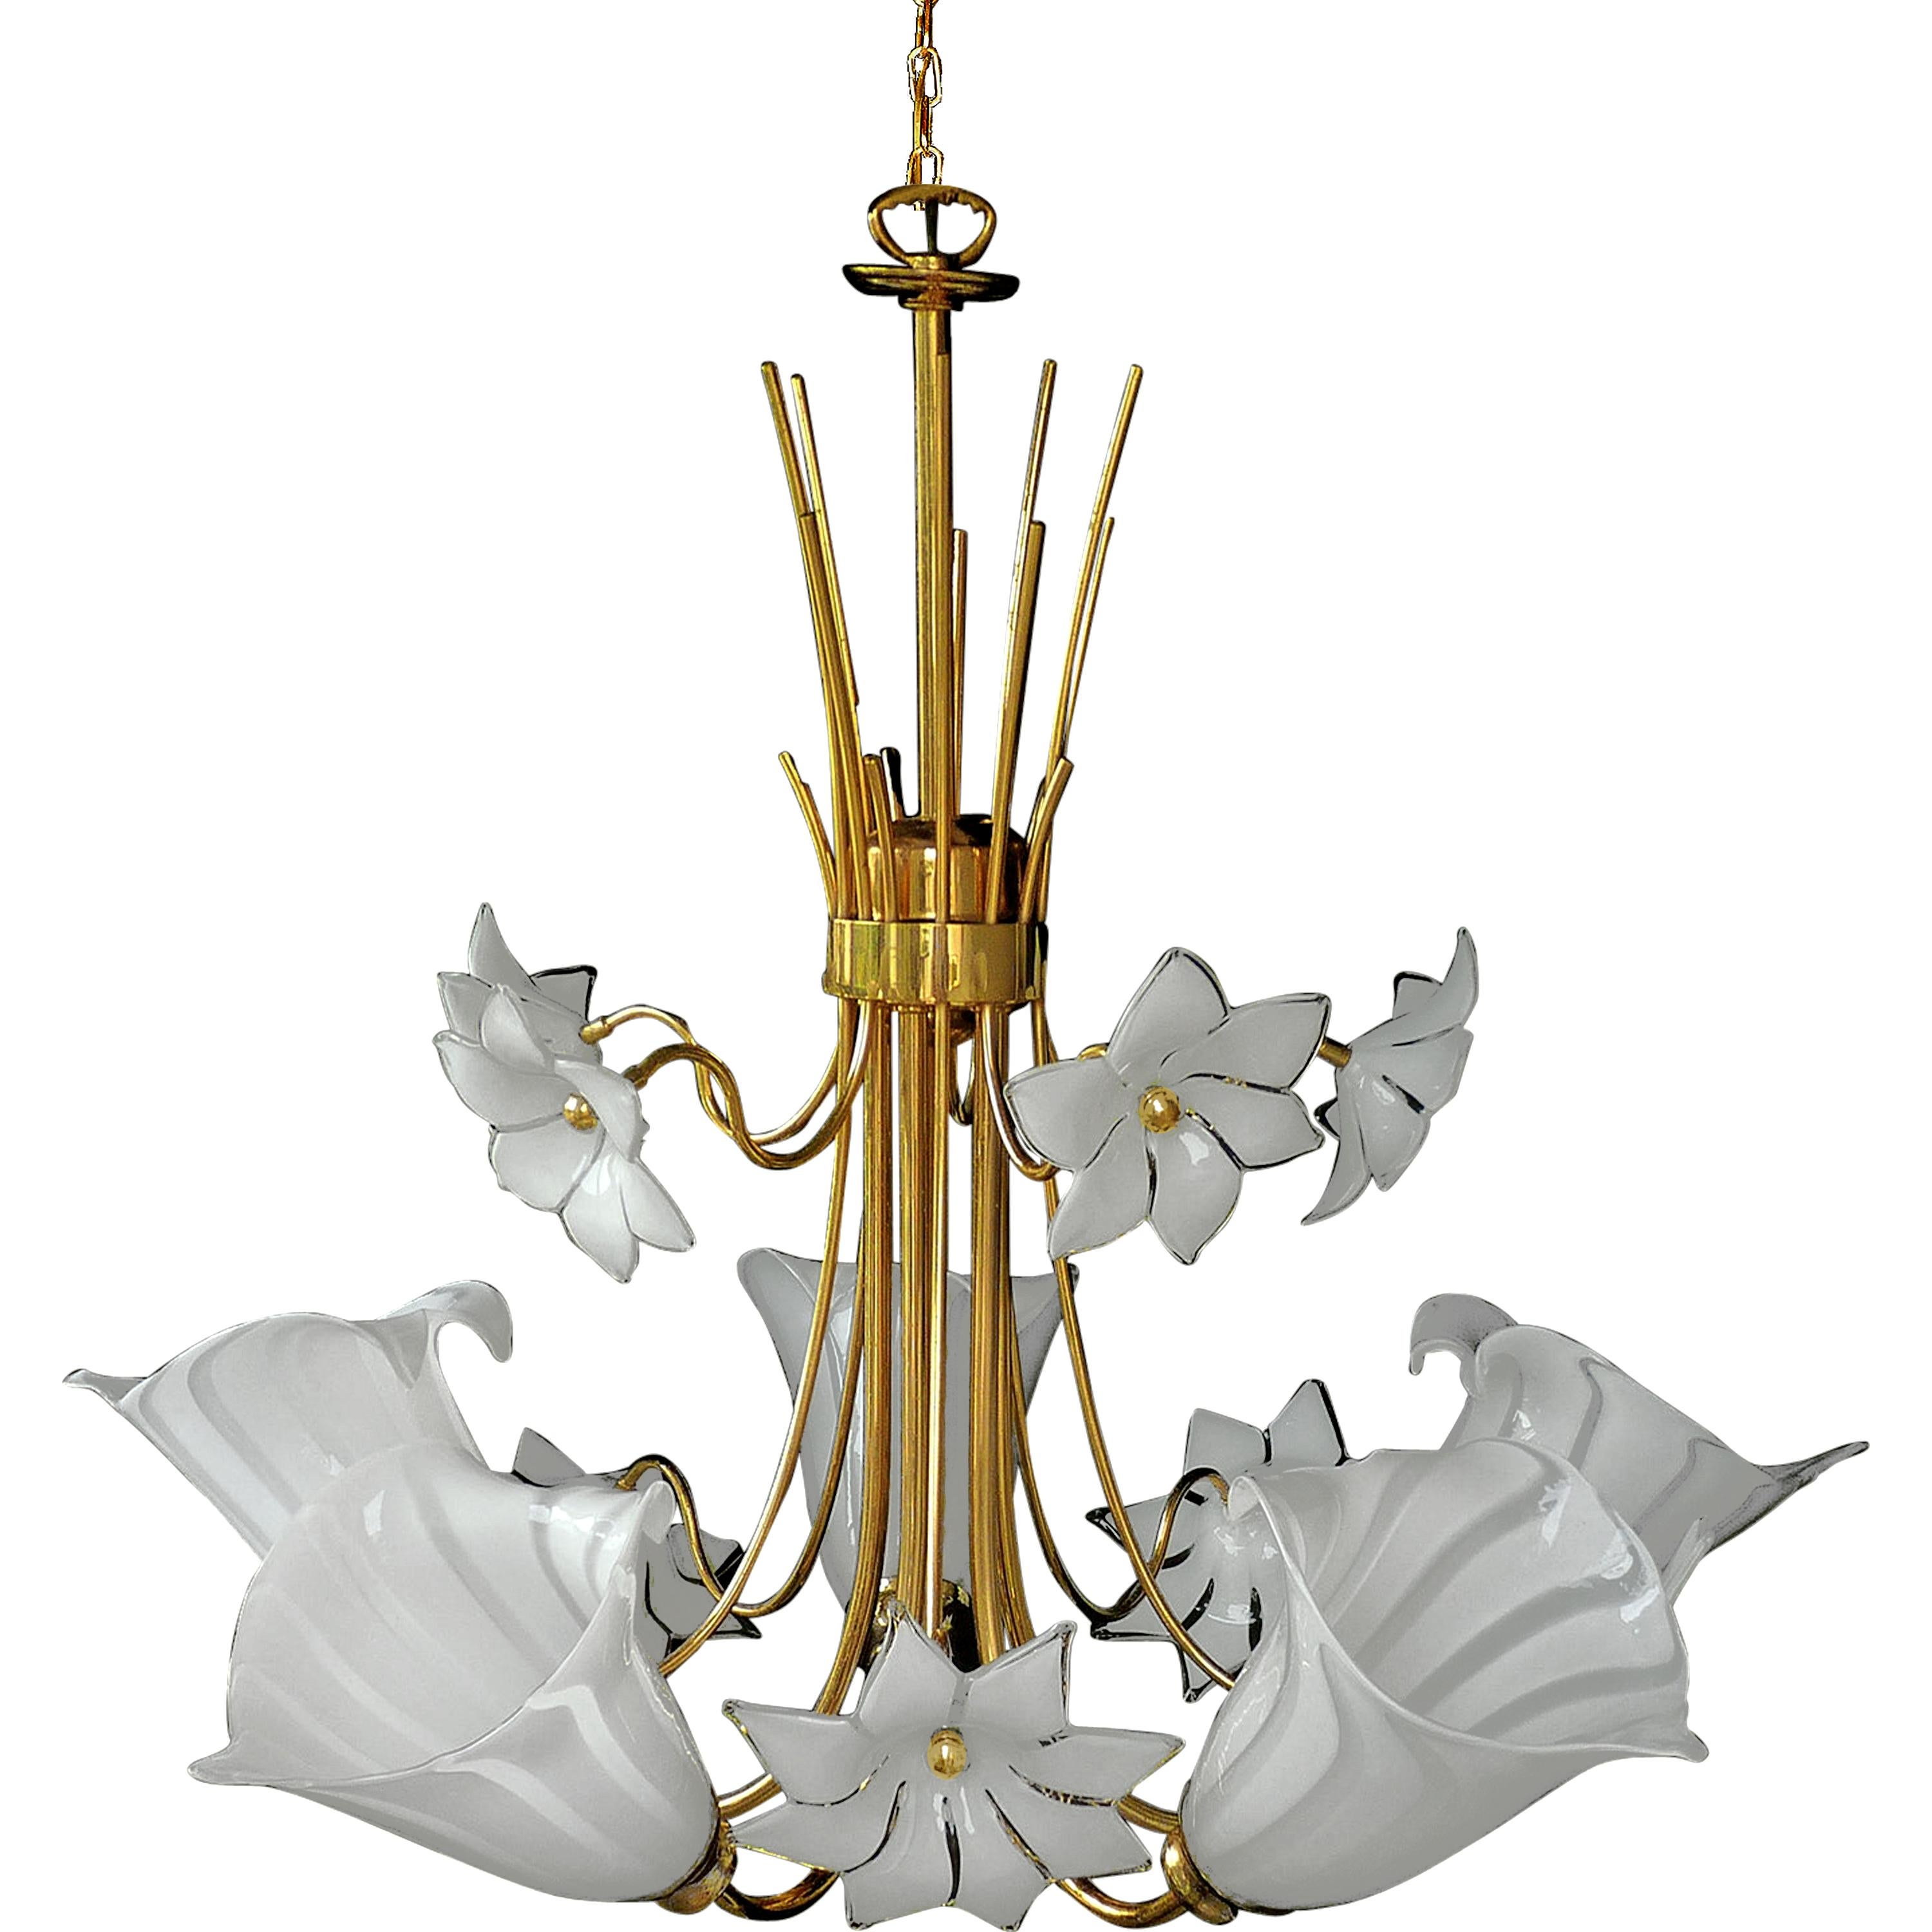 Awesome 1970s vintage Italian Murano Lily Calla art glass shades gilt chandelier. Franco Luce Seguso chandelier with hand blown Murano glass shades, white and clear glass and gold-plated brass.
Measures:
Diameter 28.5 in/ 72 cm
Height 39.4 in/ 100